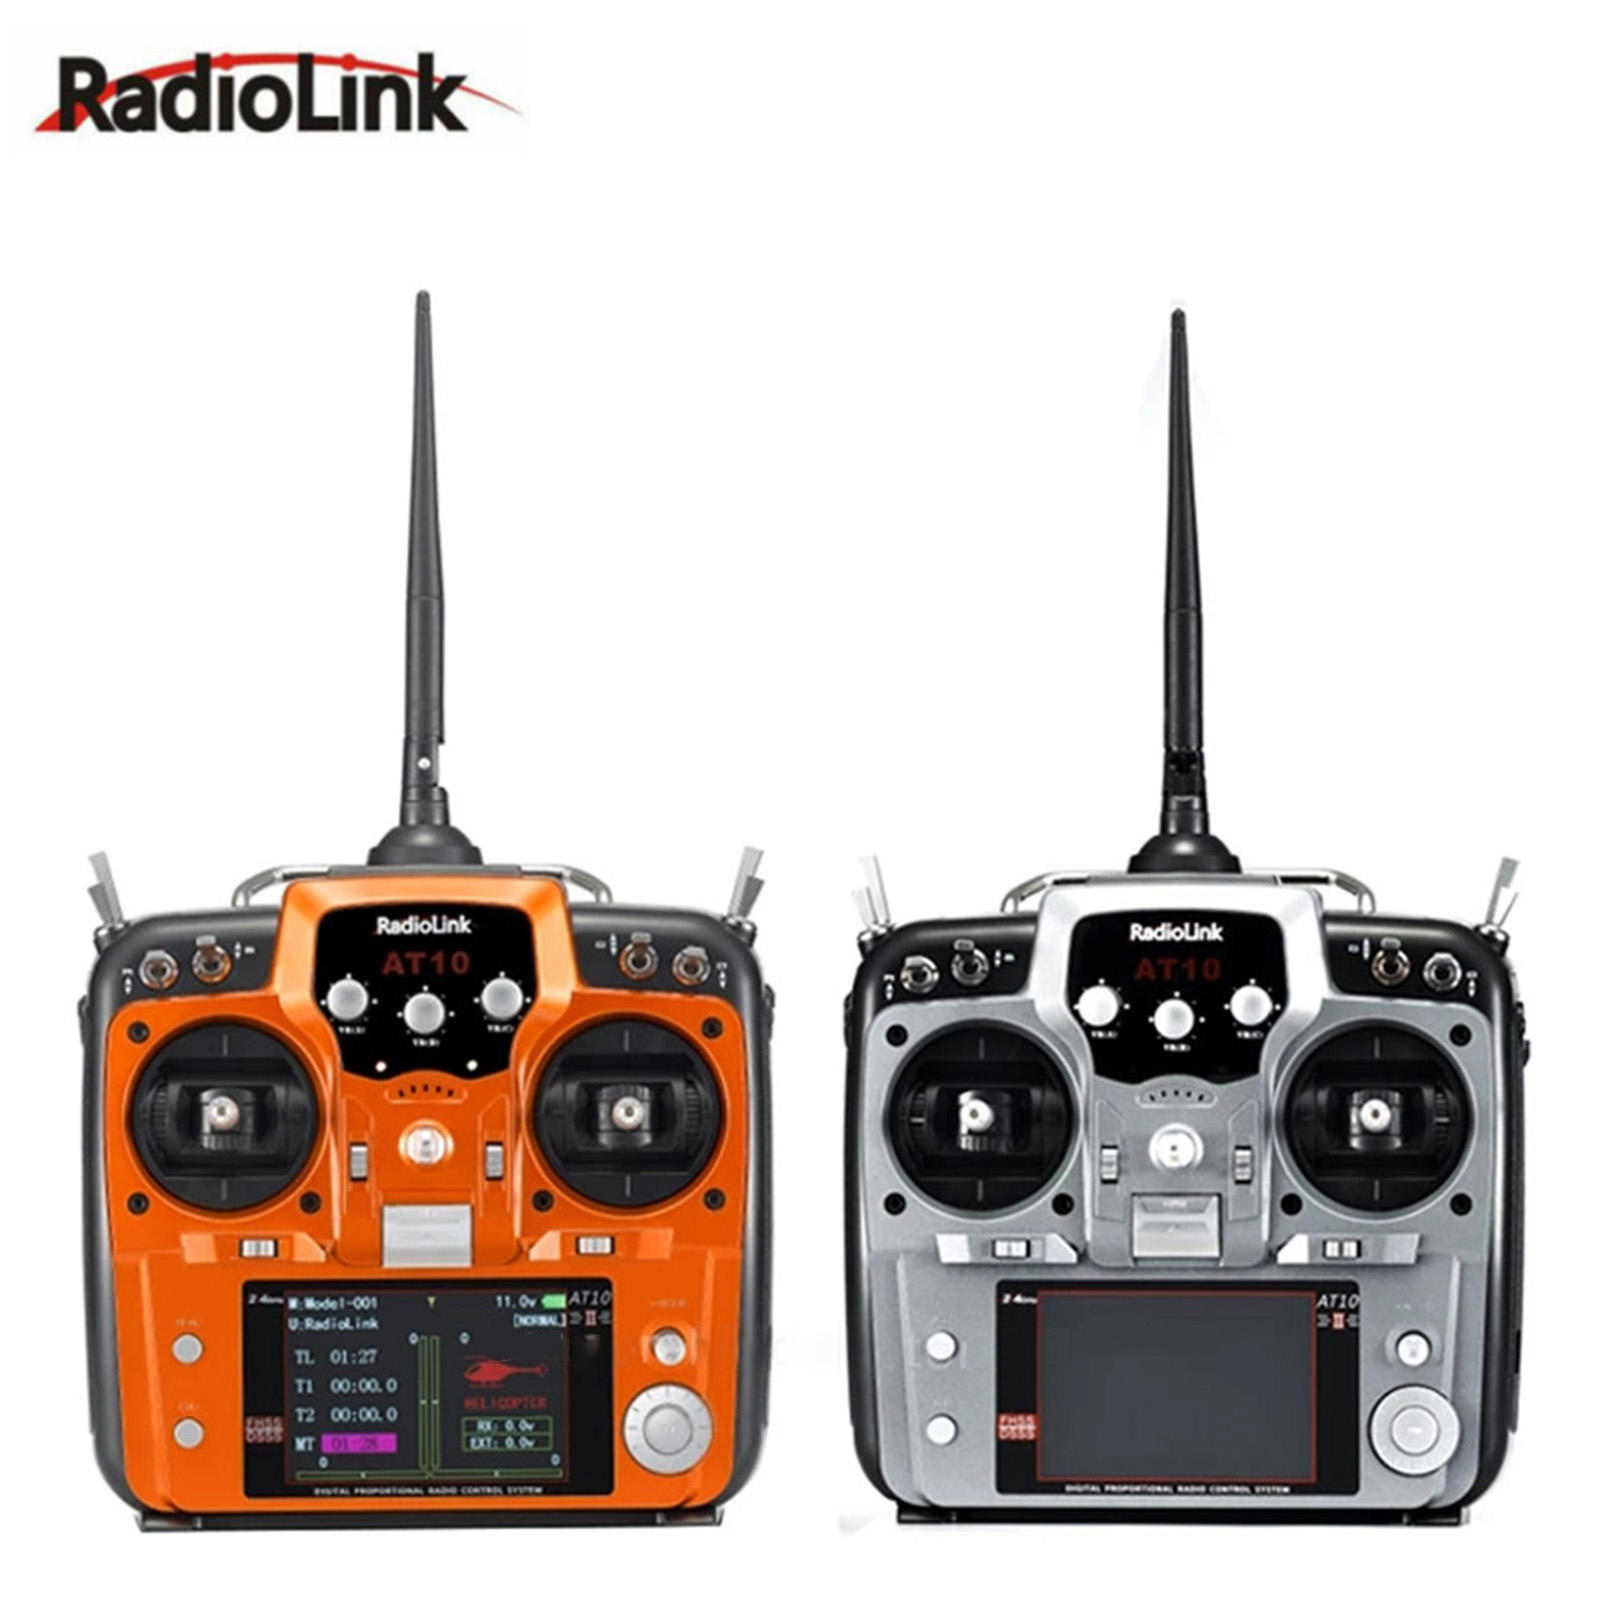 Radiolink 12CH RC Controller and Receiver for Drones